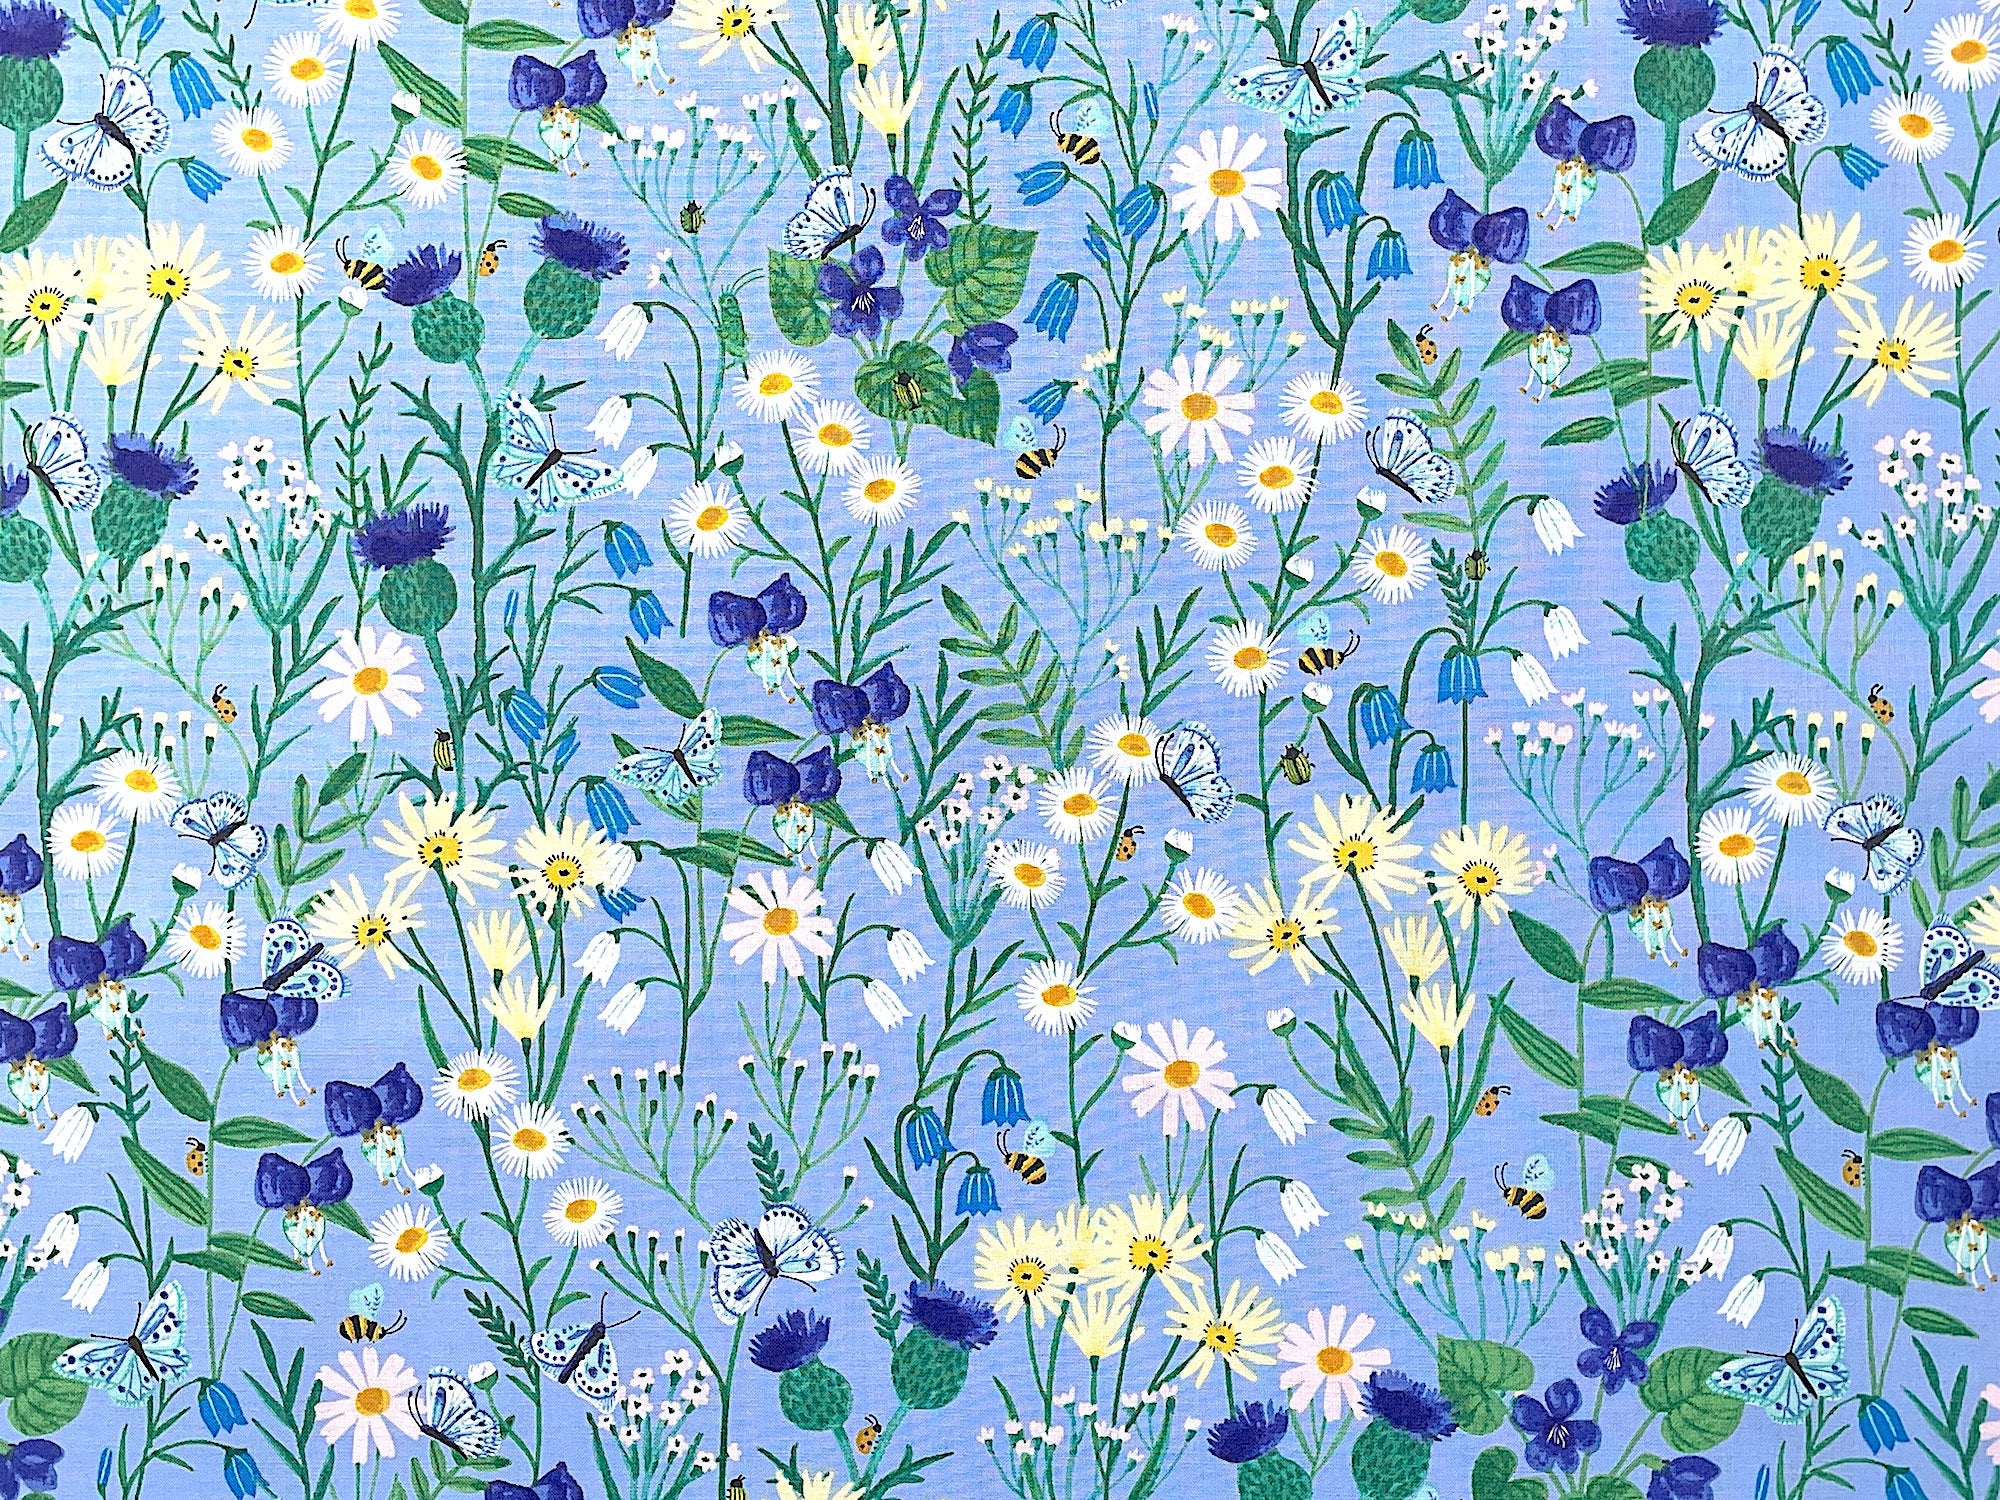 This fabric is part of the Springtime collection by Rebecca Jones. This periwinkle blue fabric is covered with white, yellow and blue flowers. There are also bees and butterflies throughout the pattern.